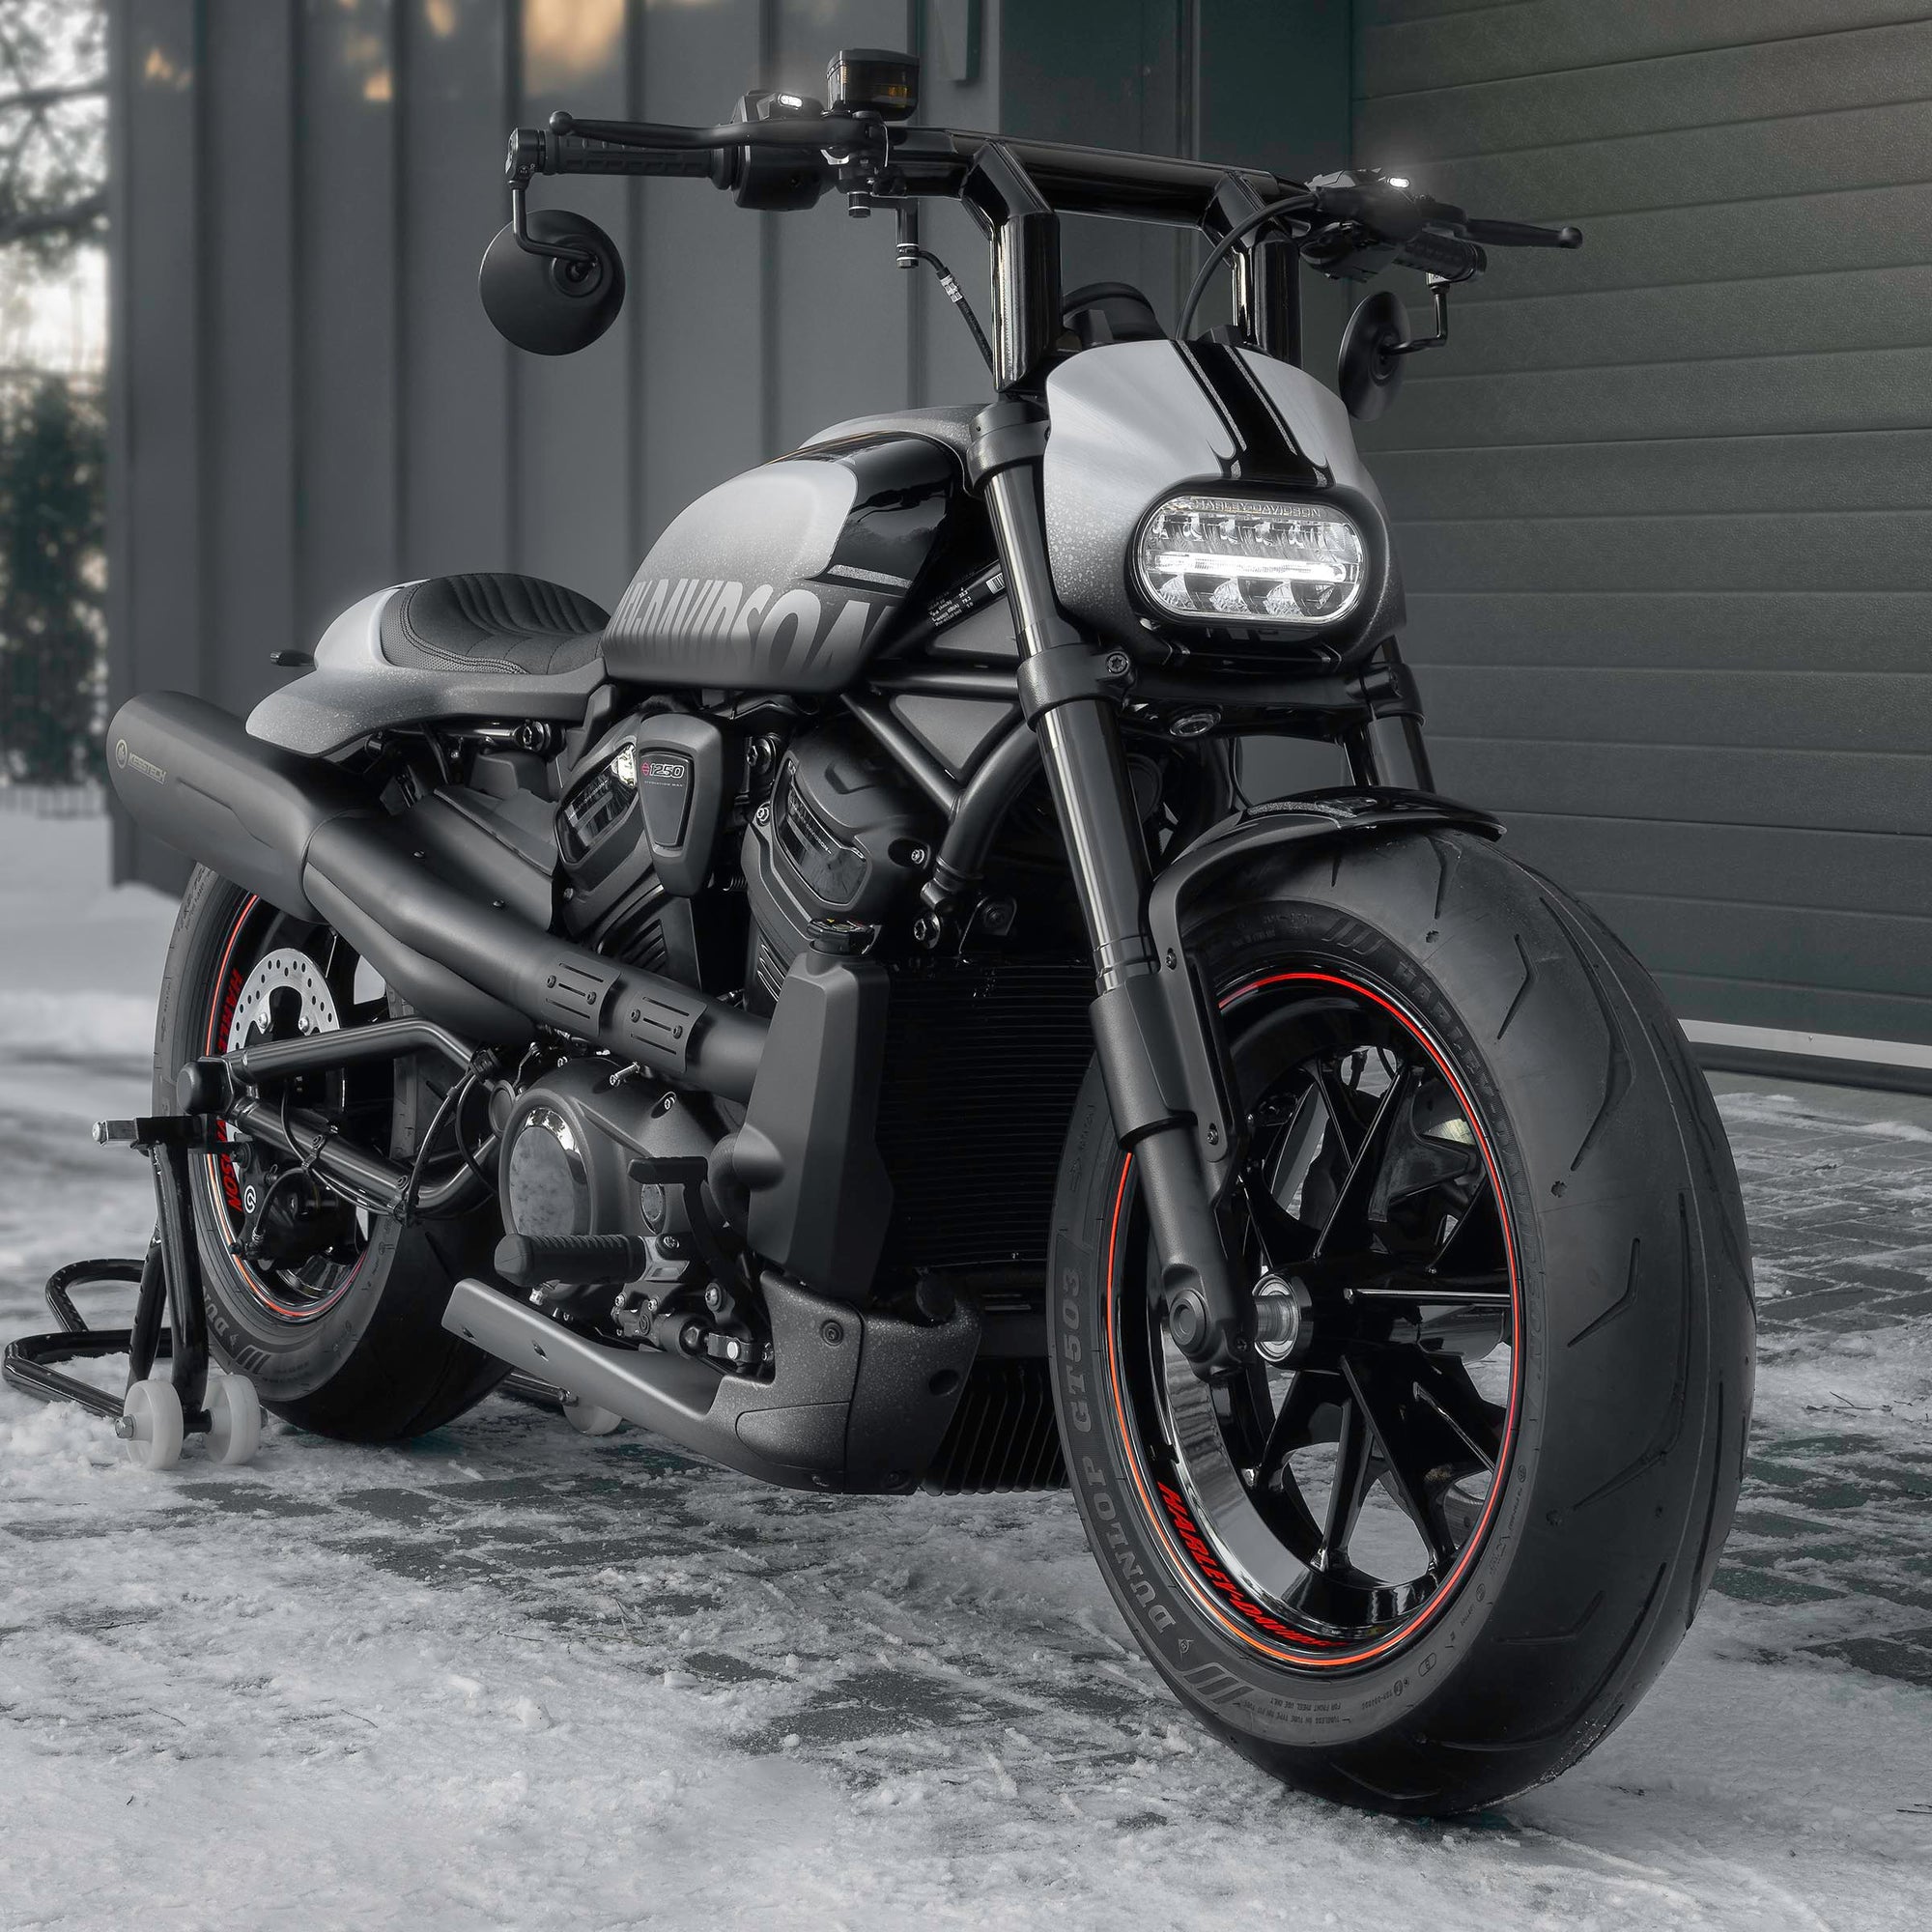 Modified Harley Davidson Sportster S motorcycle with Killer Custom parts from the front outside with some visible snow and a modern garage in the background